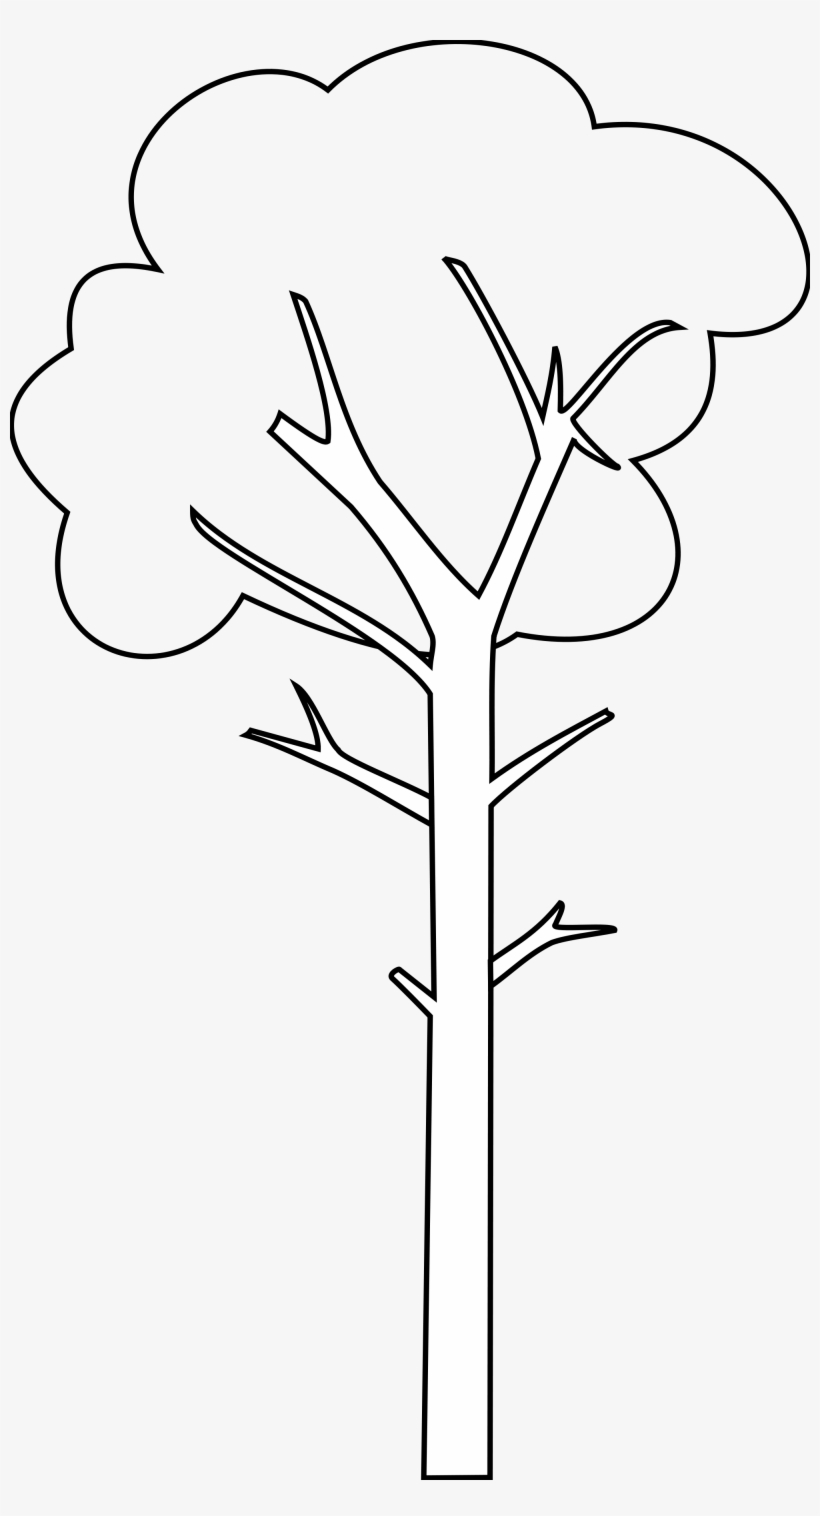 Tall Tree Cartoon Black And White - Tall Tree Clipart Black And White, transparent png #8797027